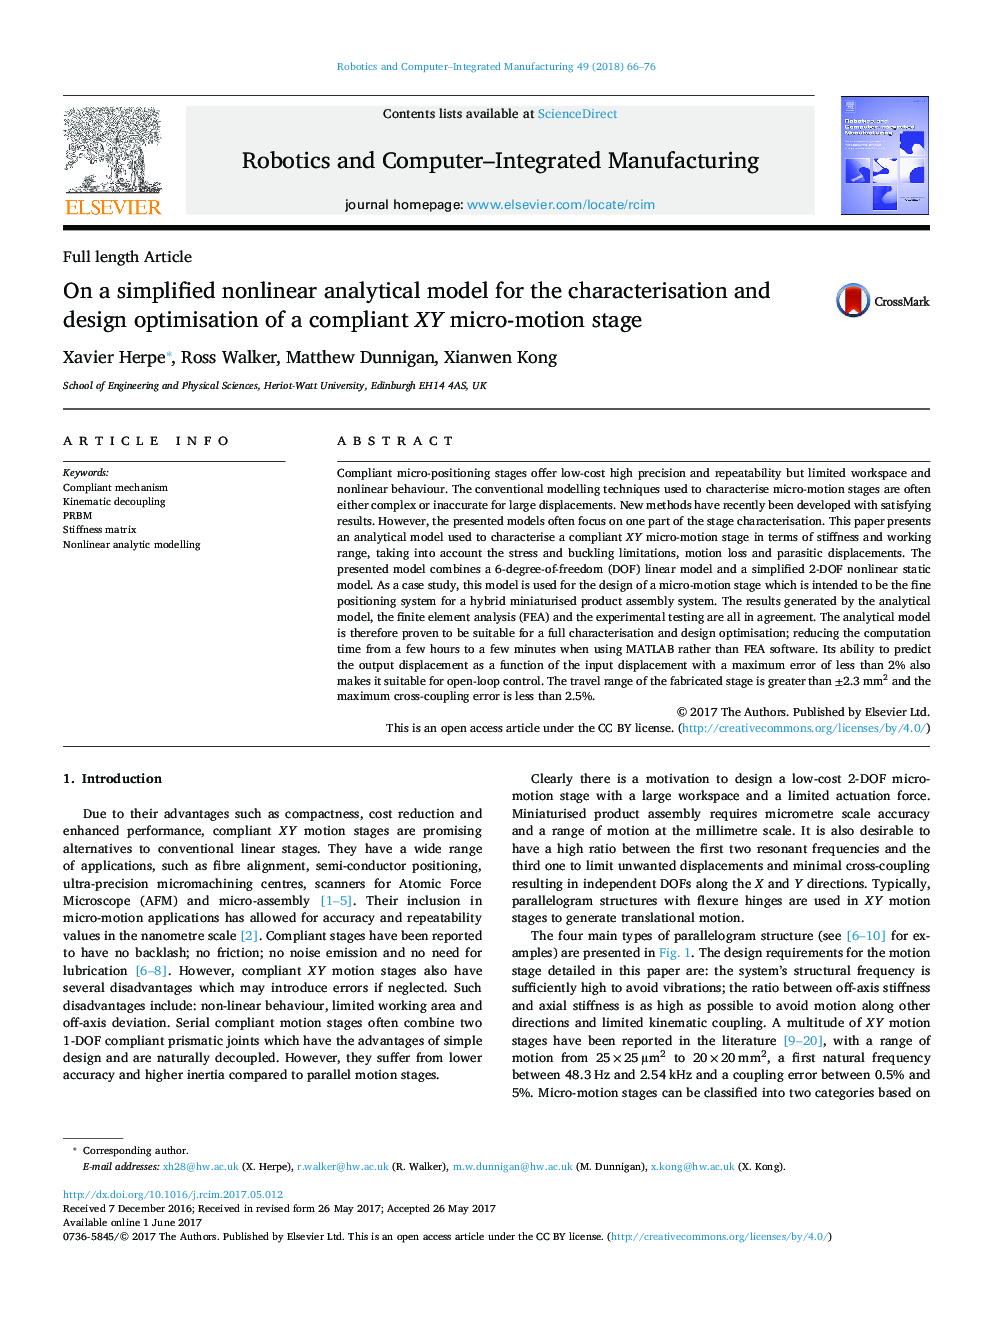 On a simplified nonlinear analytical model for the characterisation and design optimisation of a compliant XY micro-motion stage